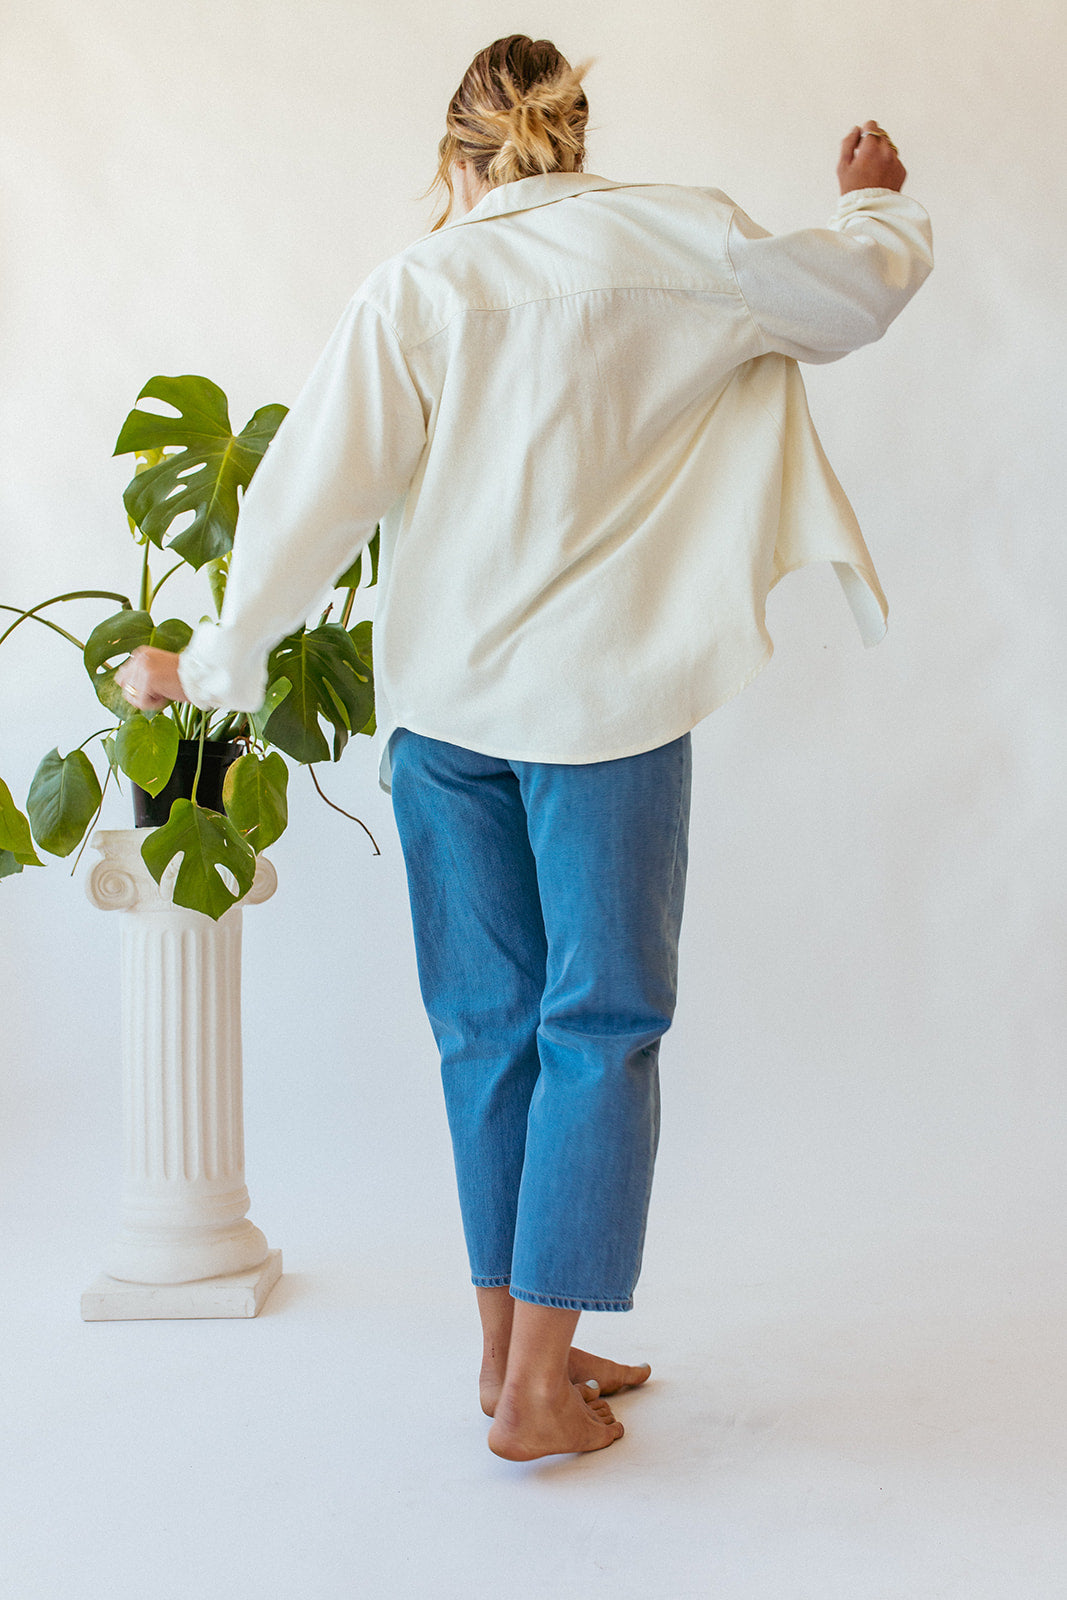 A high waisted "balloon" style leg, essentially a wide leg with a tapered ankle, with contrast stitching. Ethically made with 100% cotton in Portugal.